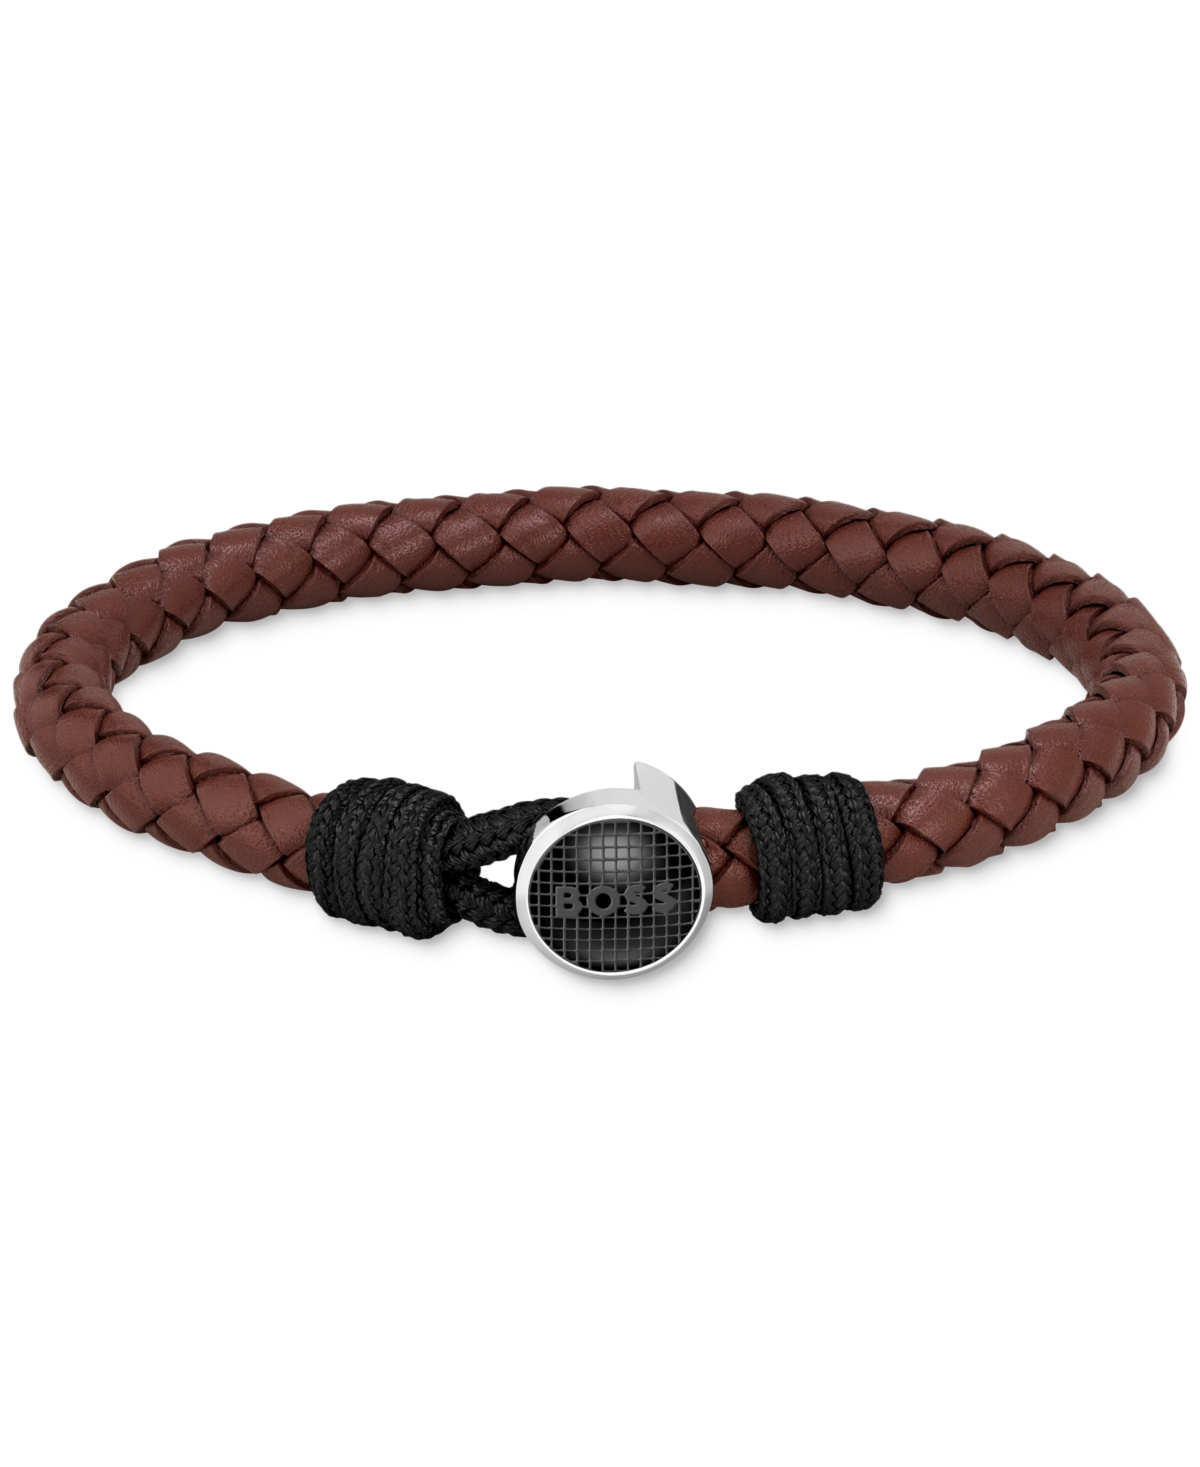 Hugo Boss Men's Thad Classic Brown Leather Braided Bracelet In Two Tone